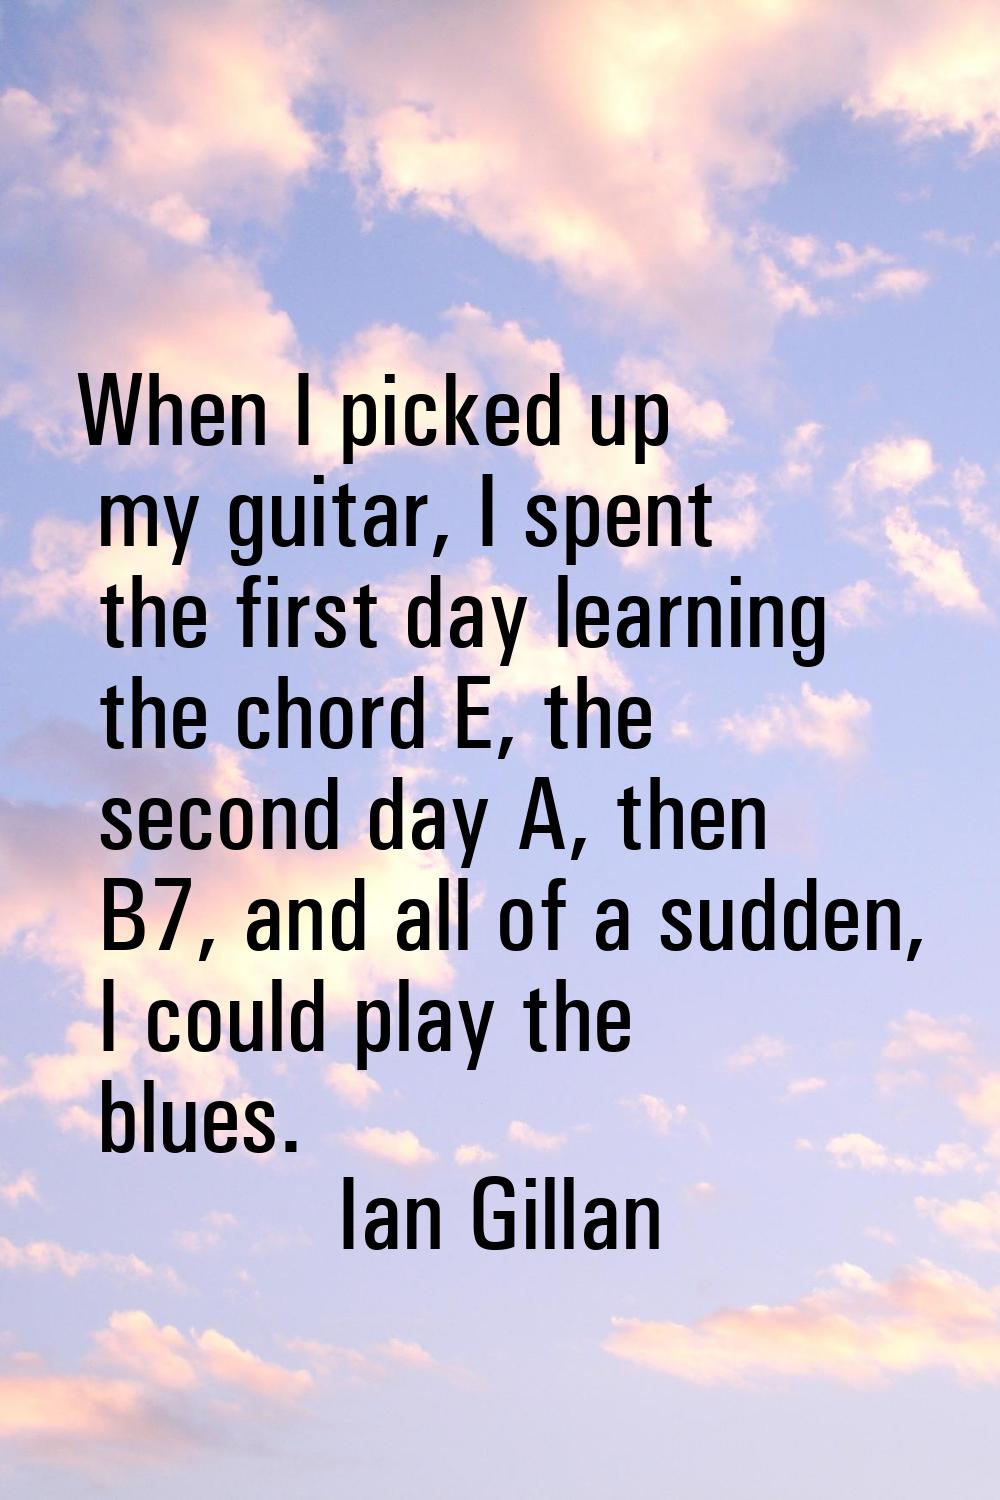 When I picked up my guitar, I spent the first day learning the chord E, the second day A, then B7, 